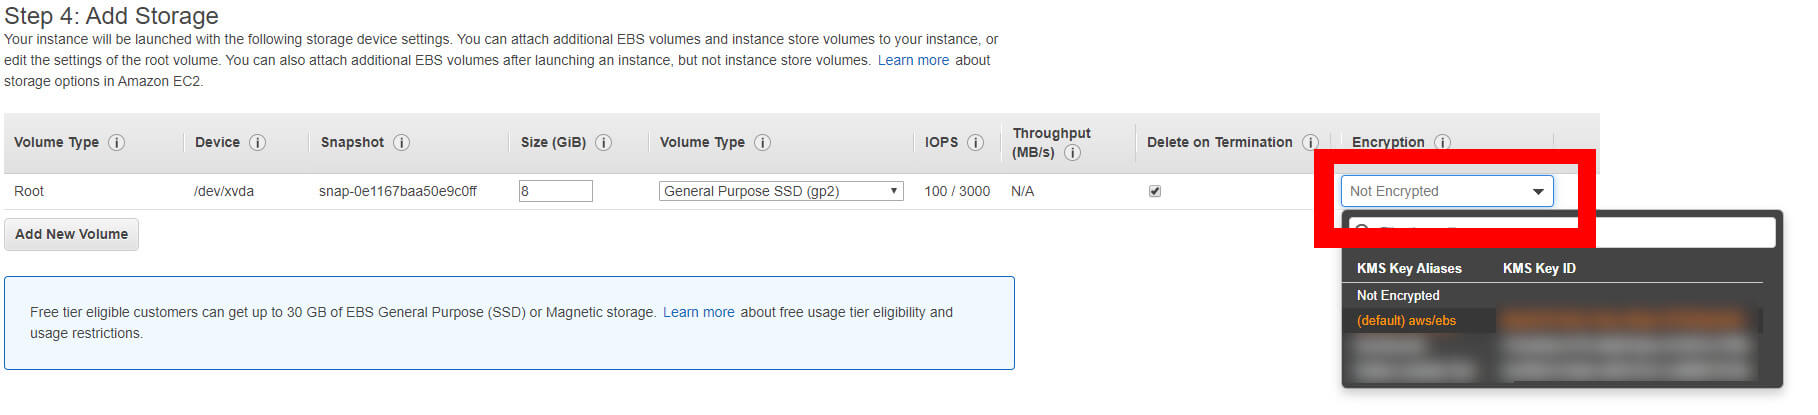 In EC2, head to the “Add Storage” section of the “Create Instance” wizard to enable encryption.